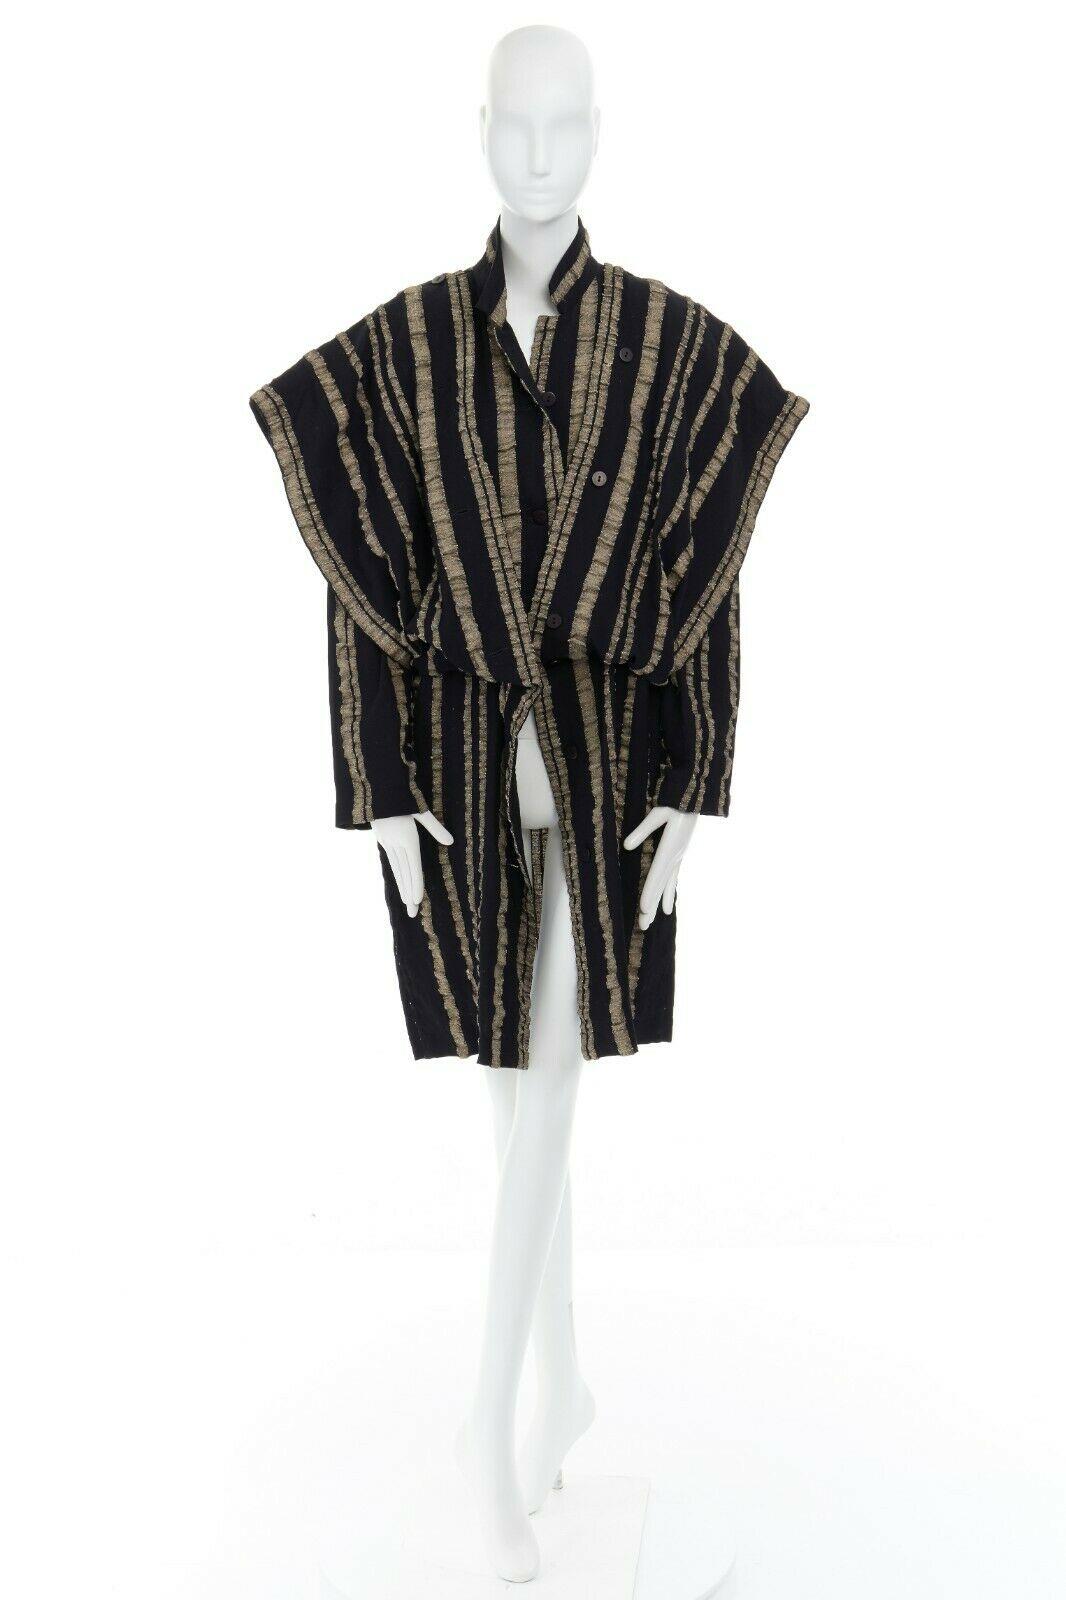 ISSEY MIYAKE 
CIRCA 1980'S VINTAGE LABEL
100% wool • Black beige vertical stripes • Notched collar • Attached panel from waist that could be worn draped or around shoulder for a sculptural samurai shoulder • Long sleeve • Button front closure •